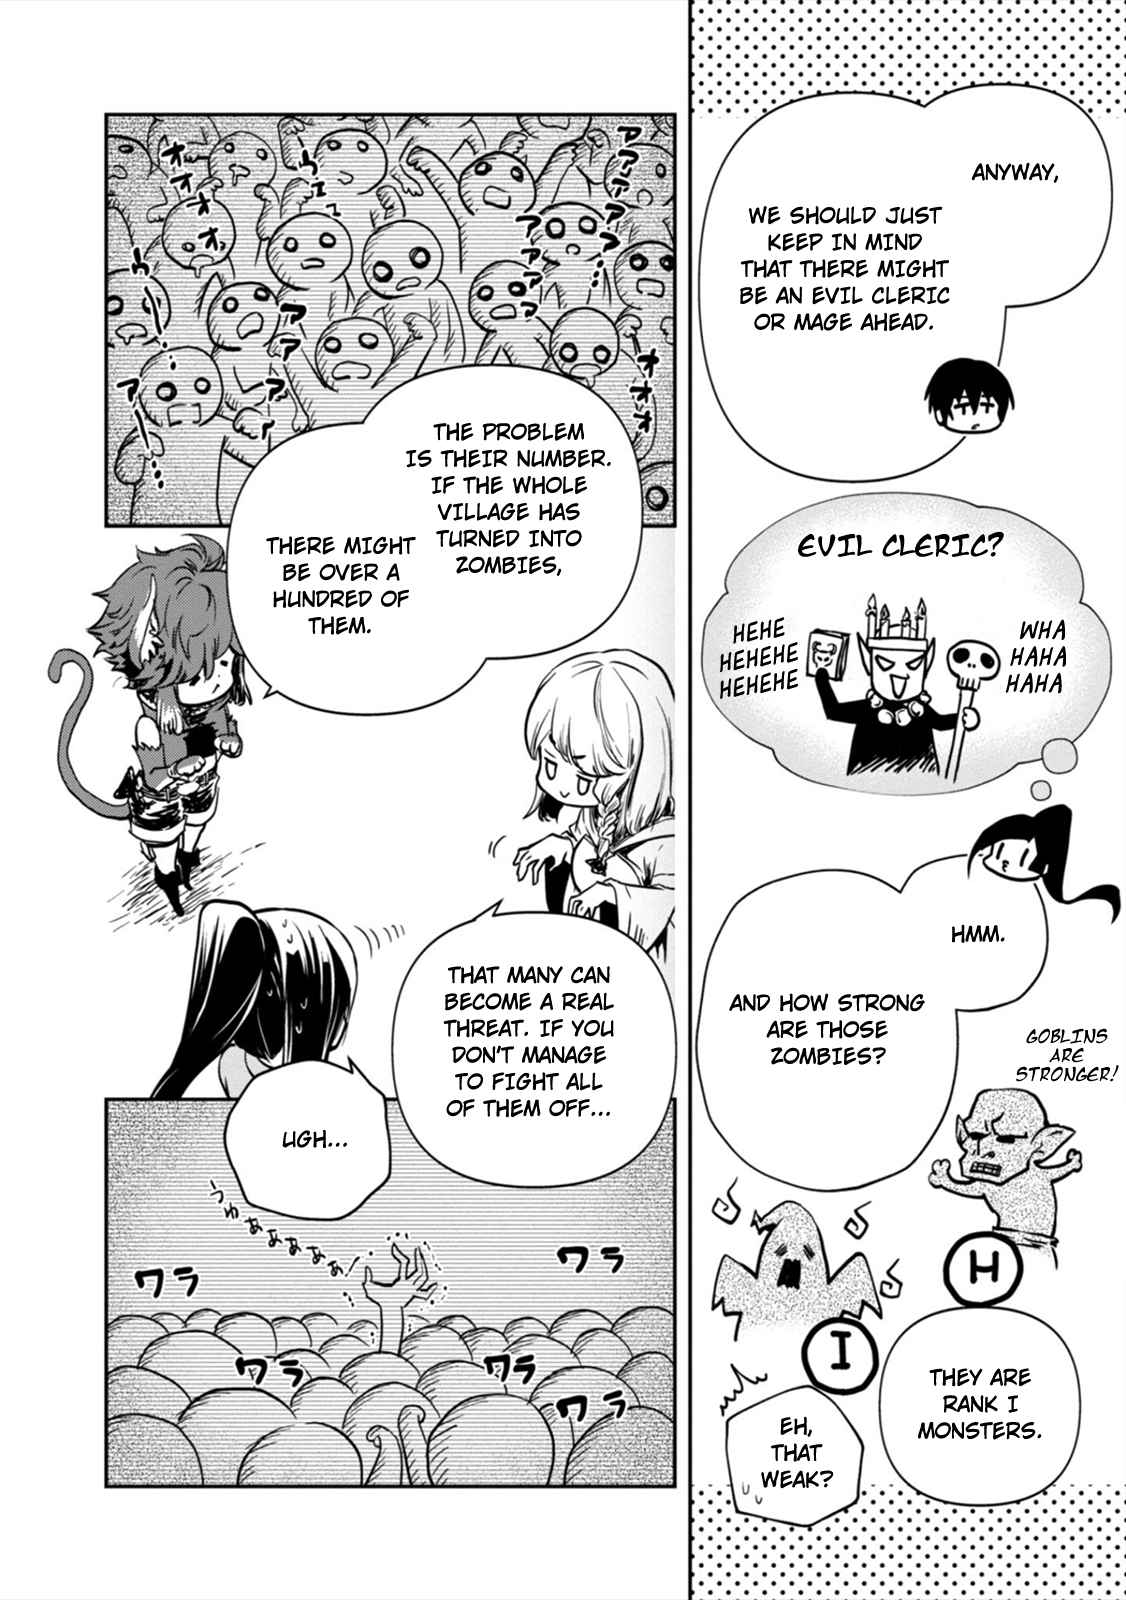 Is It Odd That I Became An Adventurer Even If I Graduated The Witchcraft Institute? Vol. 1 Ch. 2